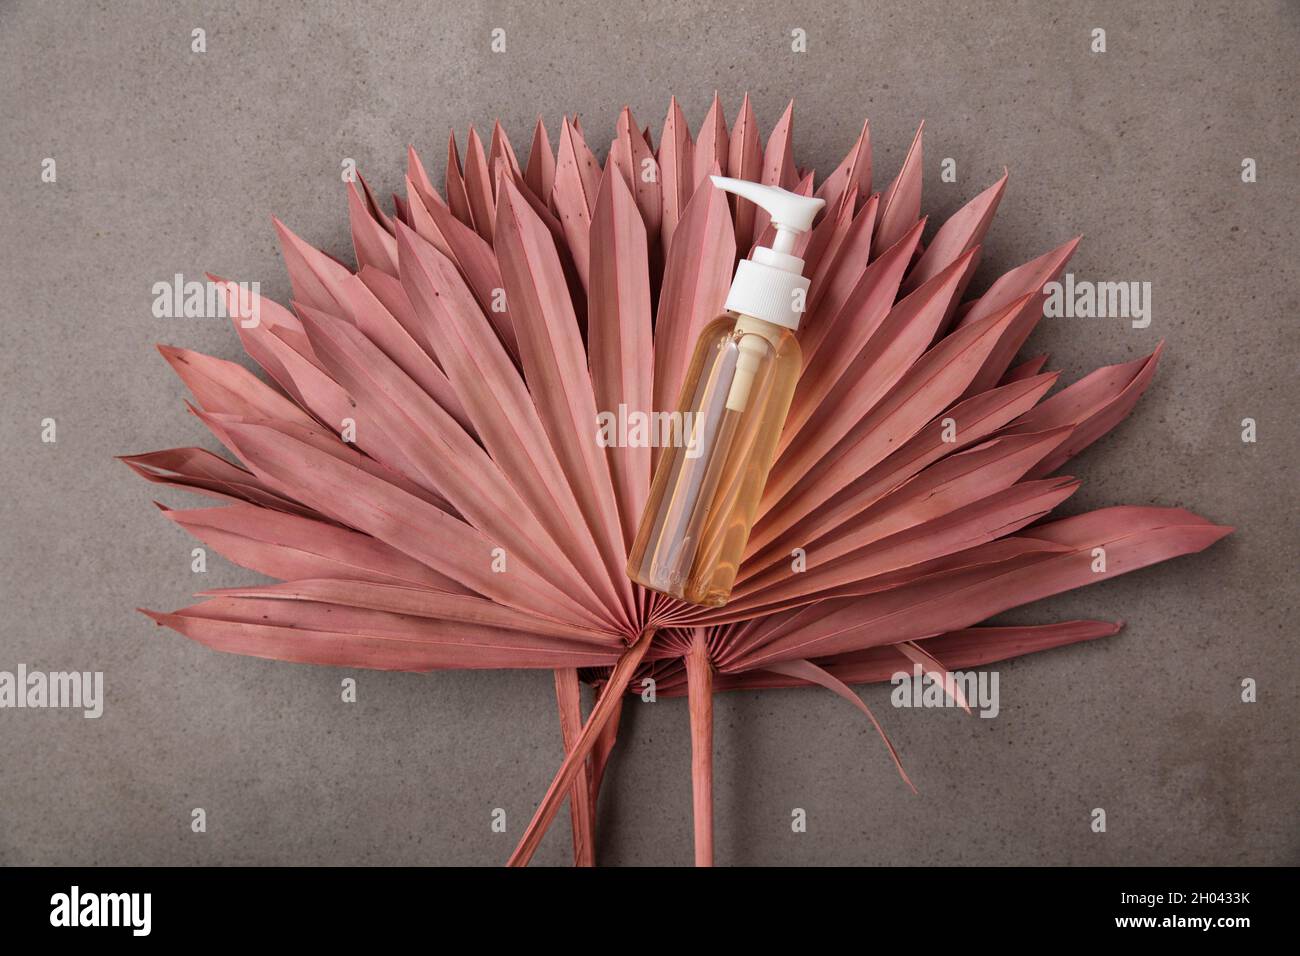 Natural beauty product background with a bottle and dried pink palm leaves Stock Photo